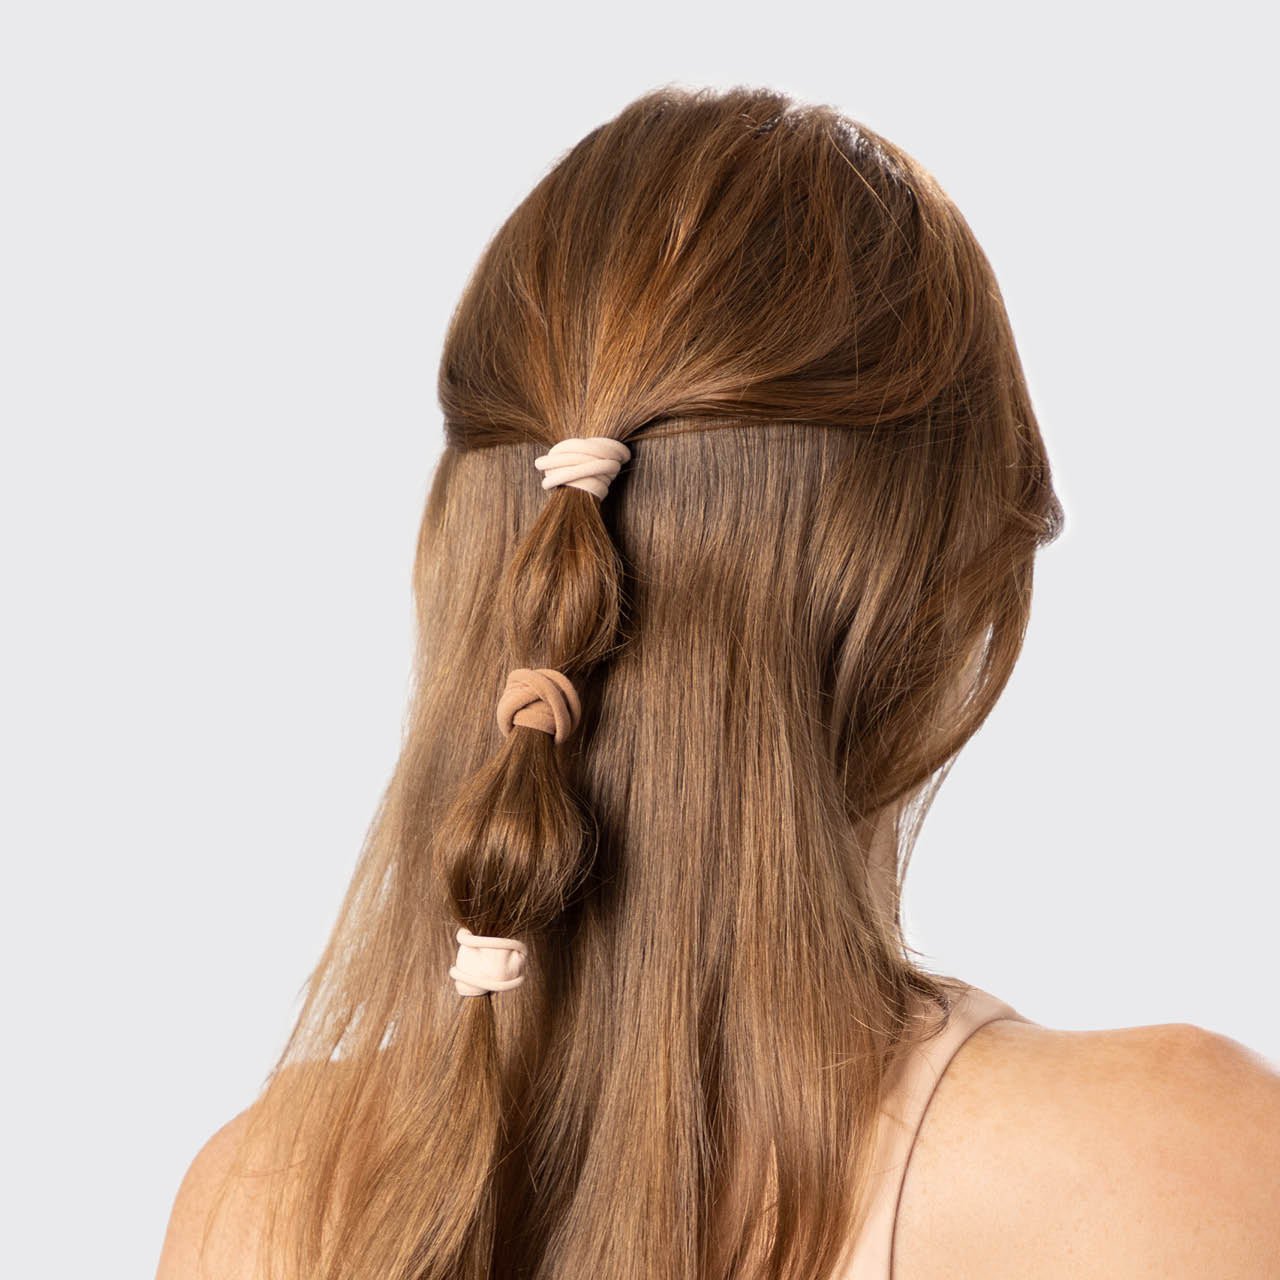 NG 3-in-1 Low Ponytail Hair Accessories - Set 1